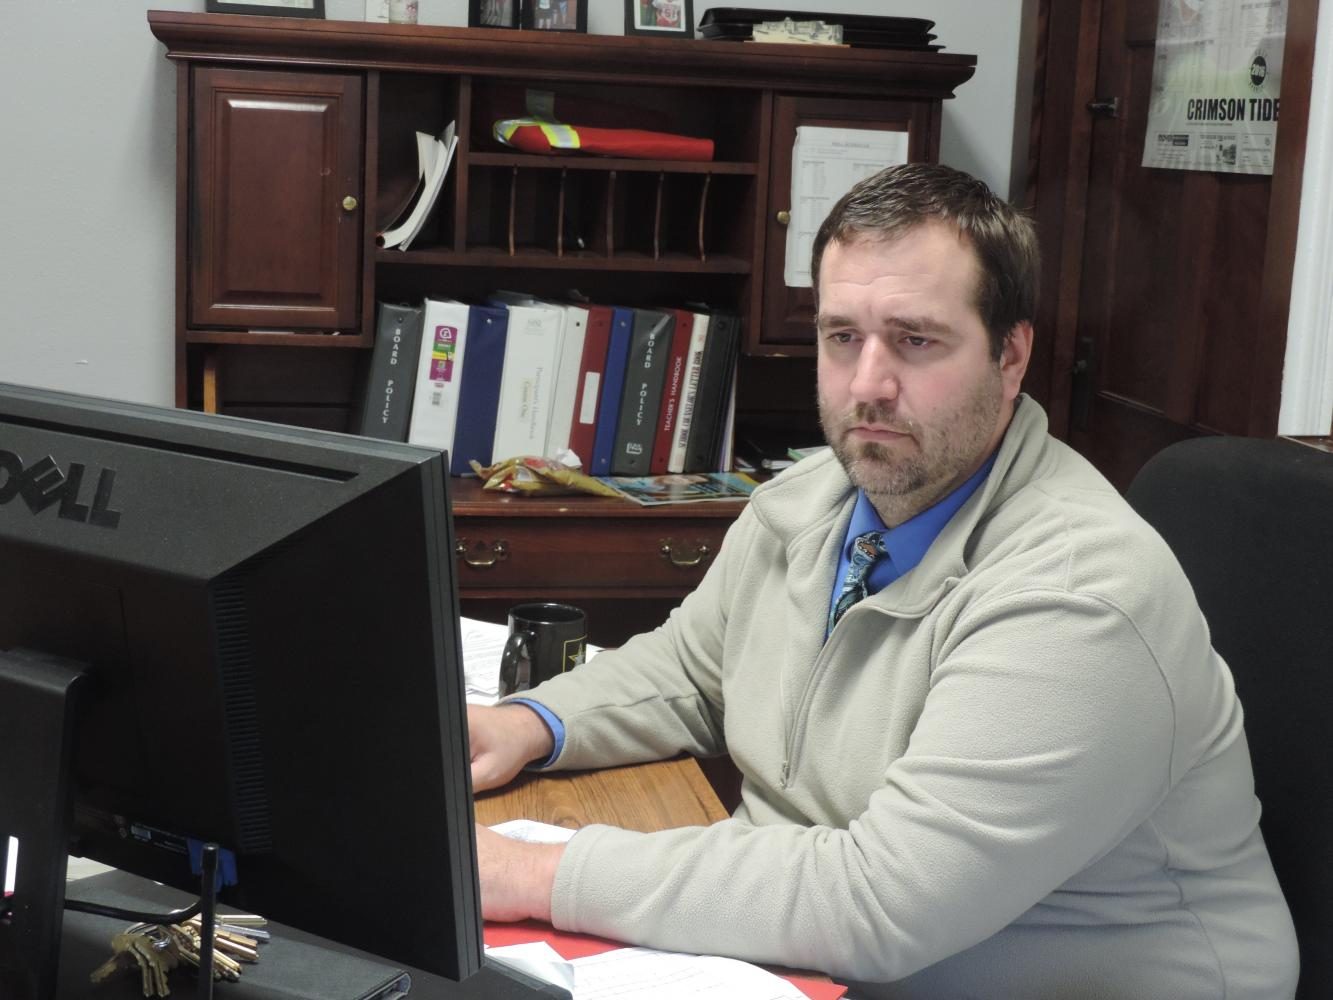 COMPUTE — Working on Skyward, Mr. Jeffrey Godin, former vice principal at PAHS, views students’ grades and attendance records. While at PAHS, Mr. Godin worked primarily with data entry and observations along with dealing with various disciplinary issues.